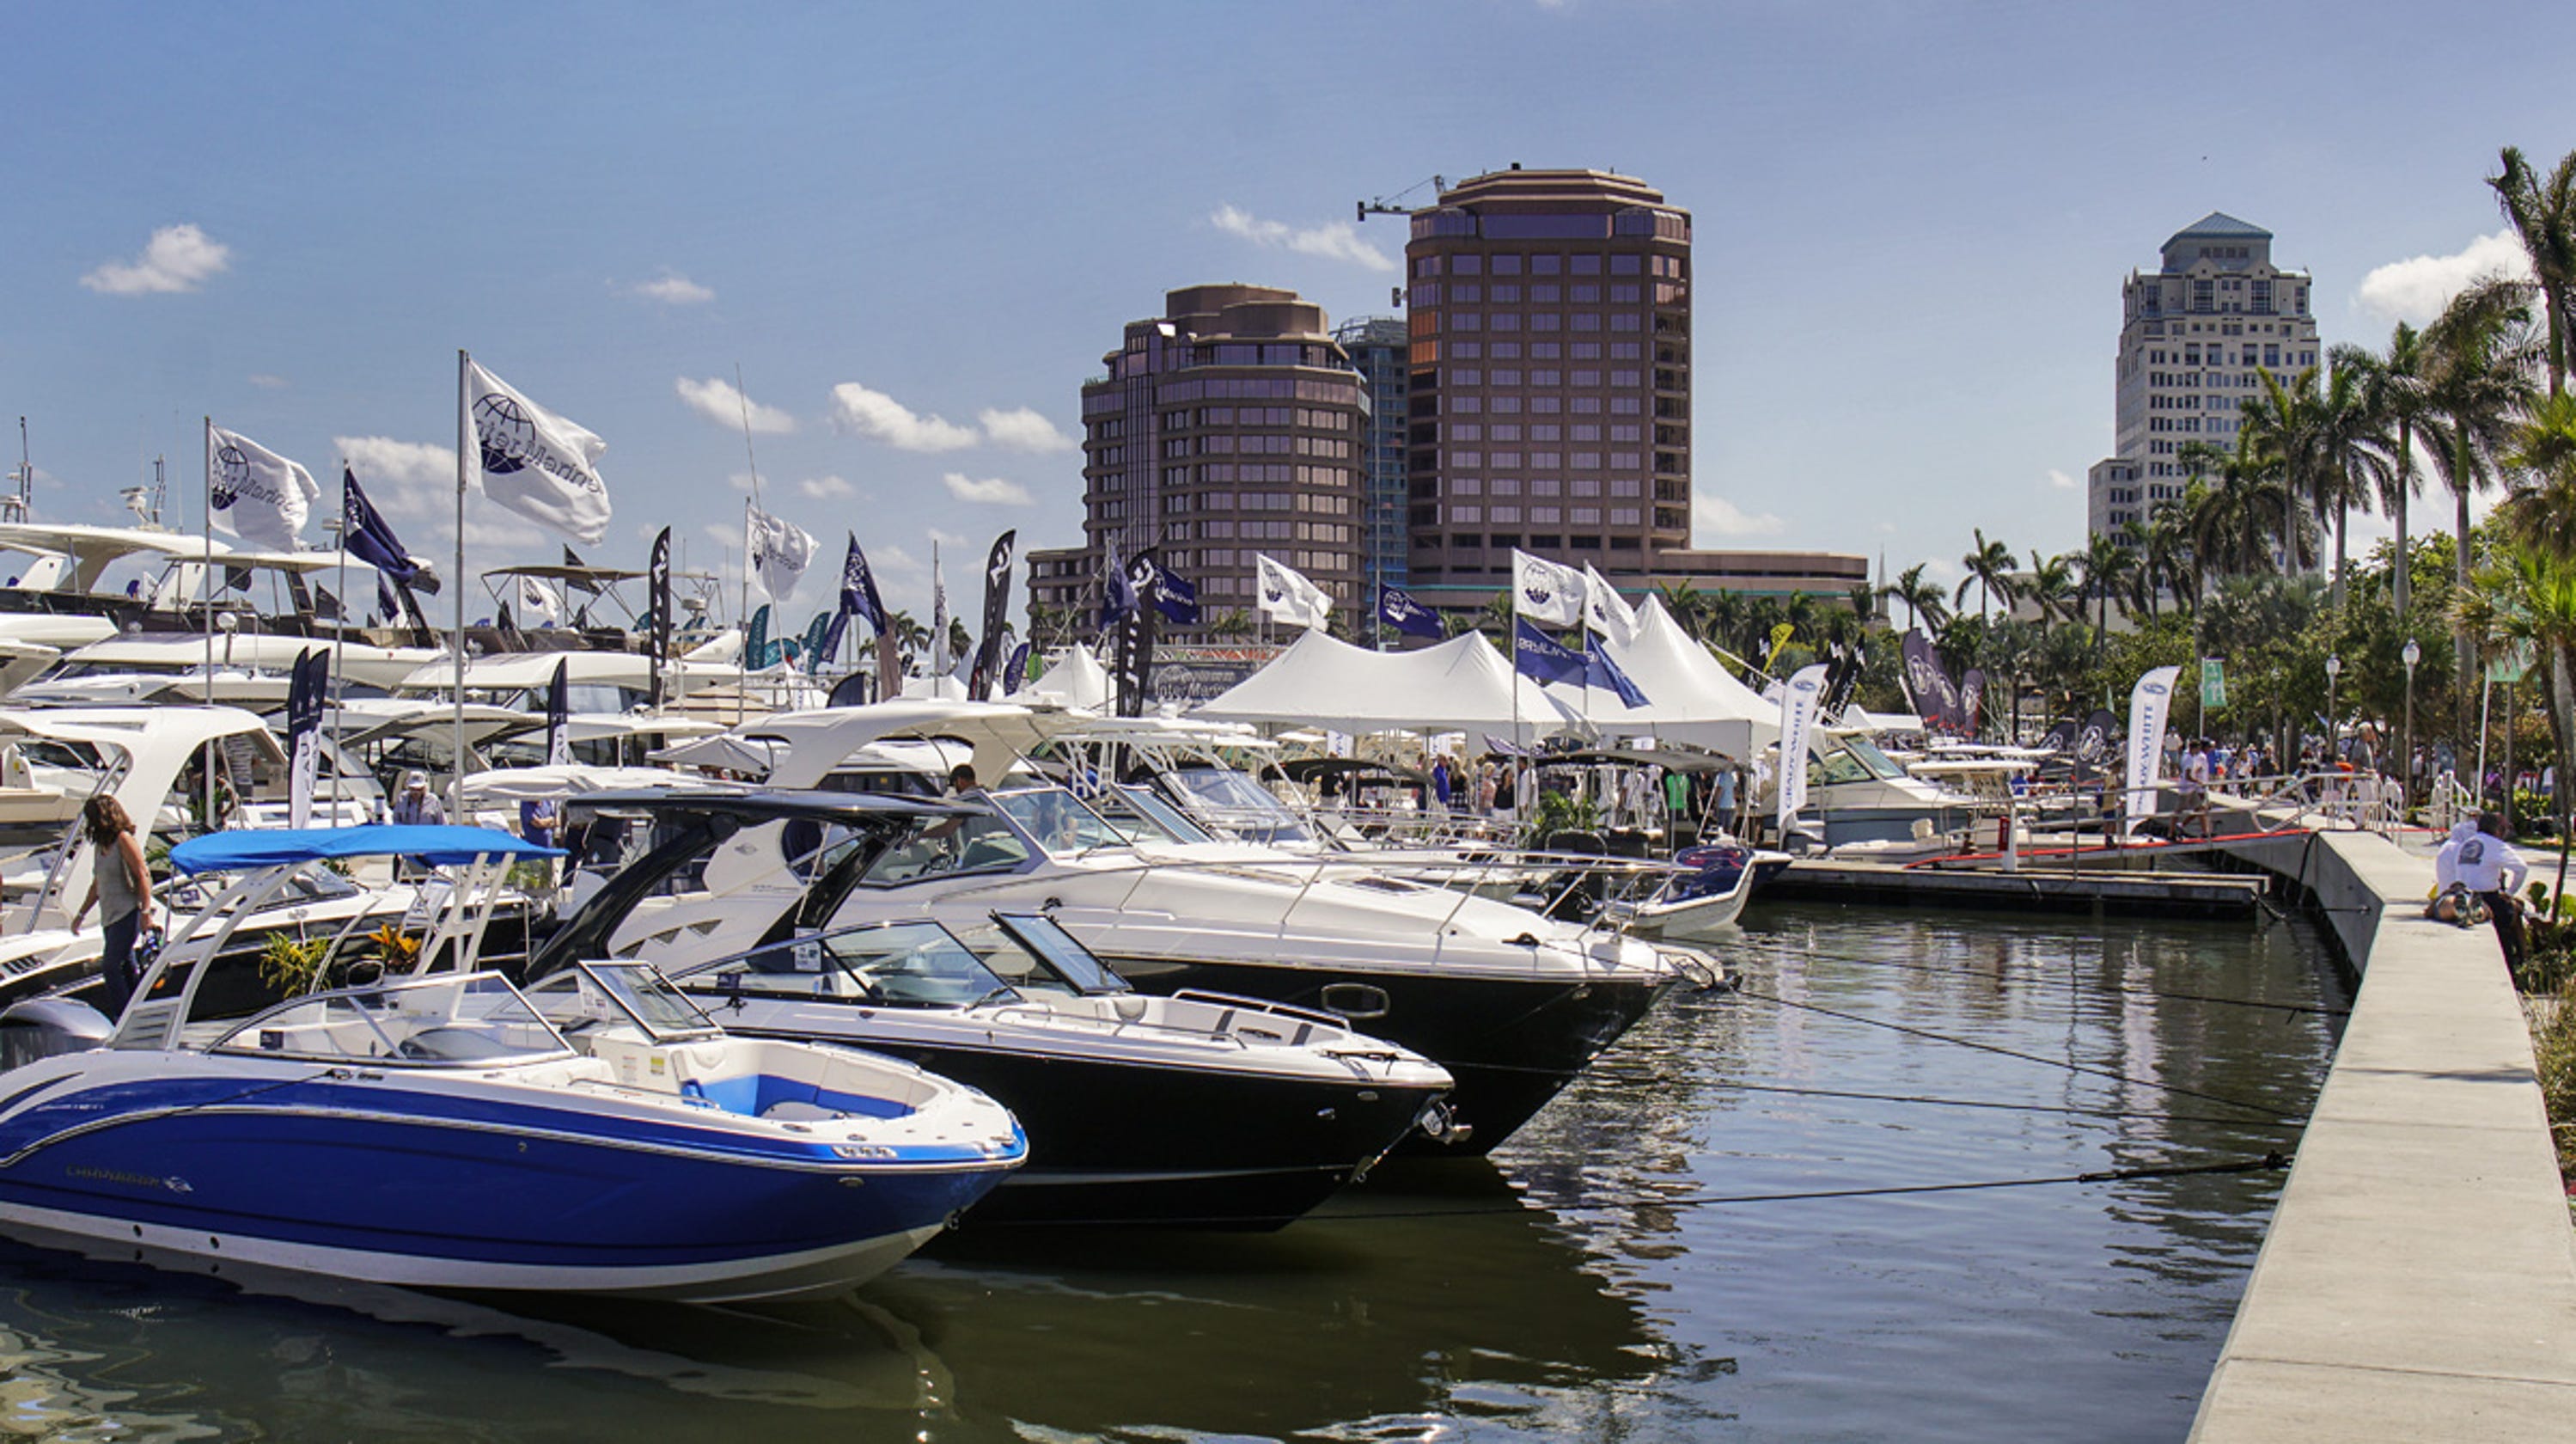 Palm Beach Boat Show will offer boats of all sizes, seminars, cool